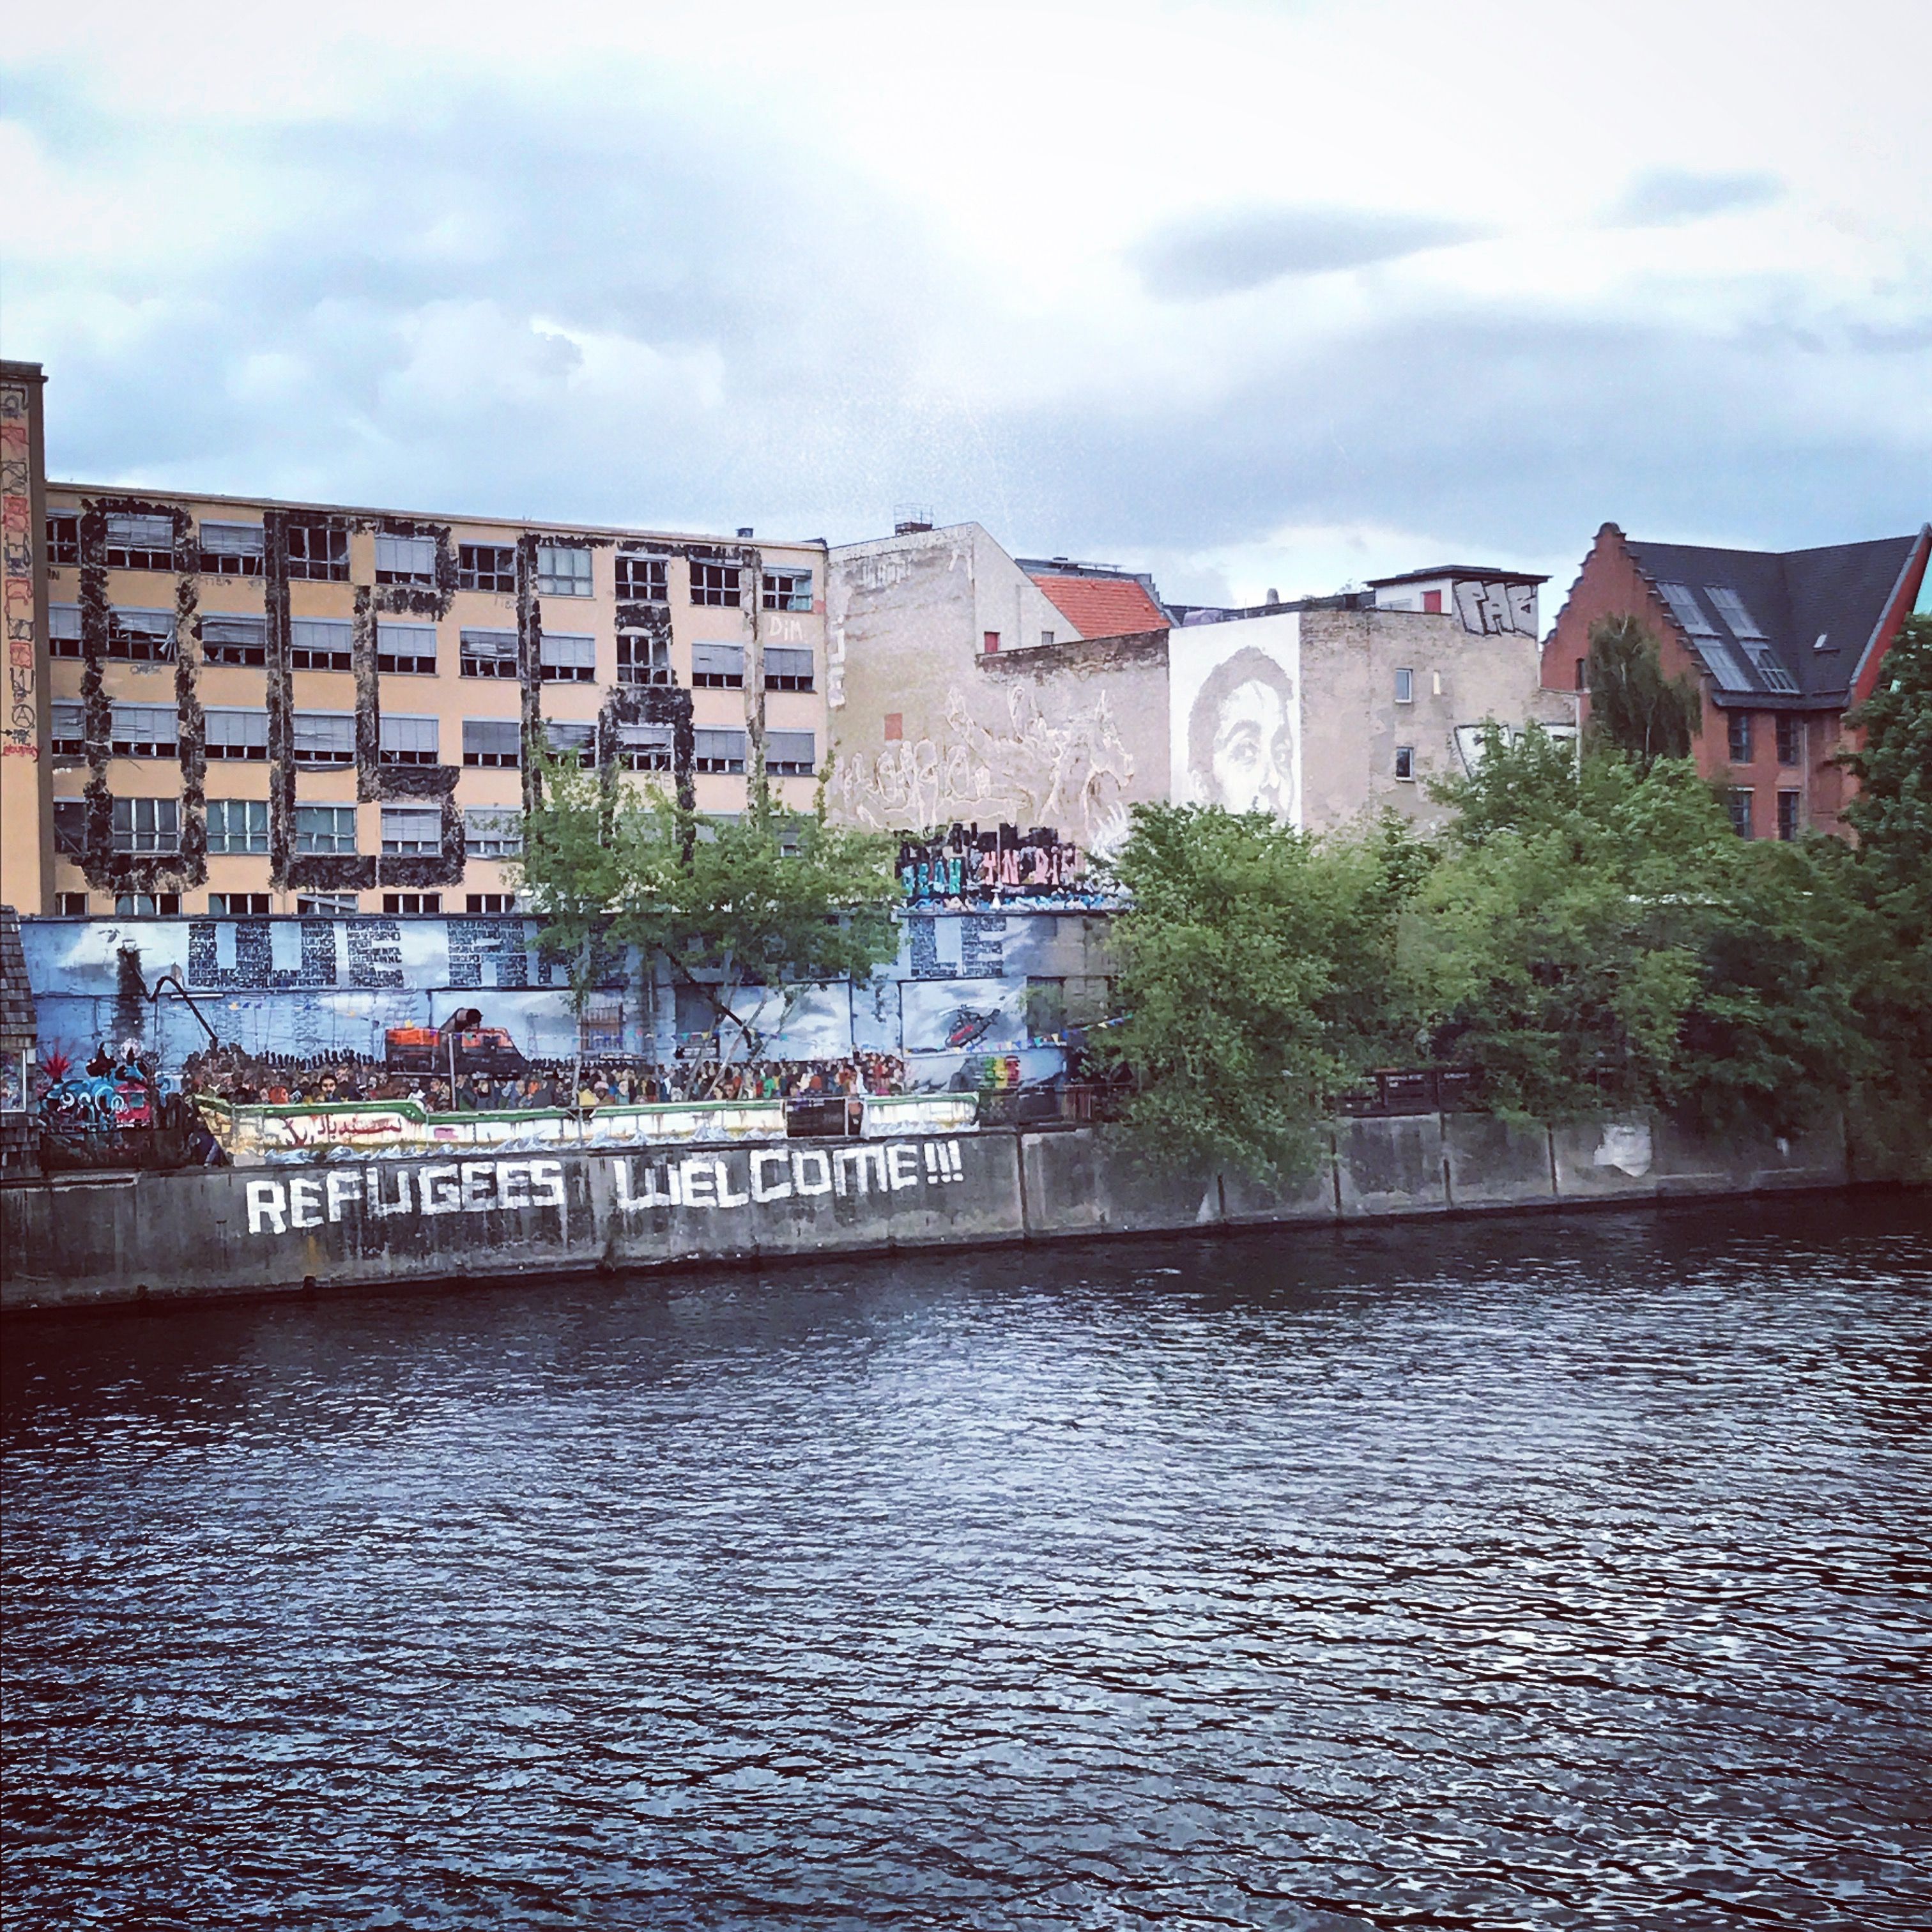 "Refugees Welcome" written on a wall in Berlin. Germany took in the most refugees during Europe's 2015 influx. Image by Alice Su. Germany, 2017.